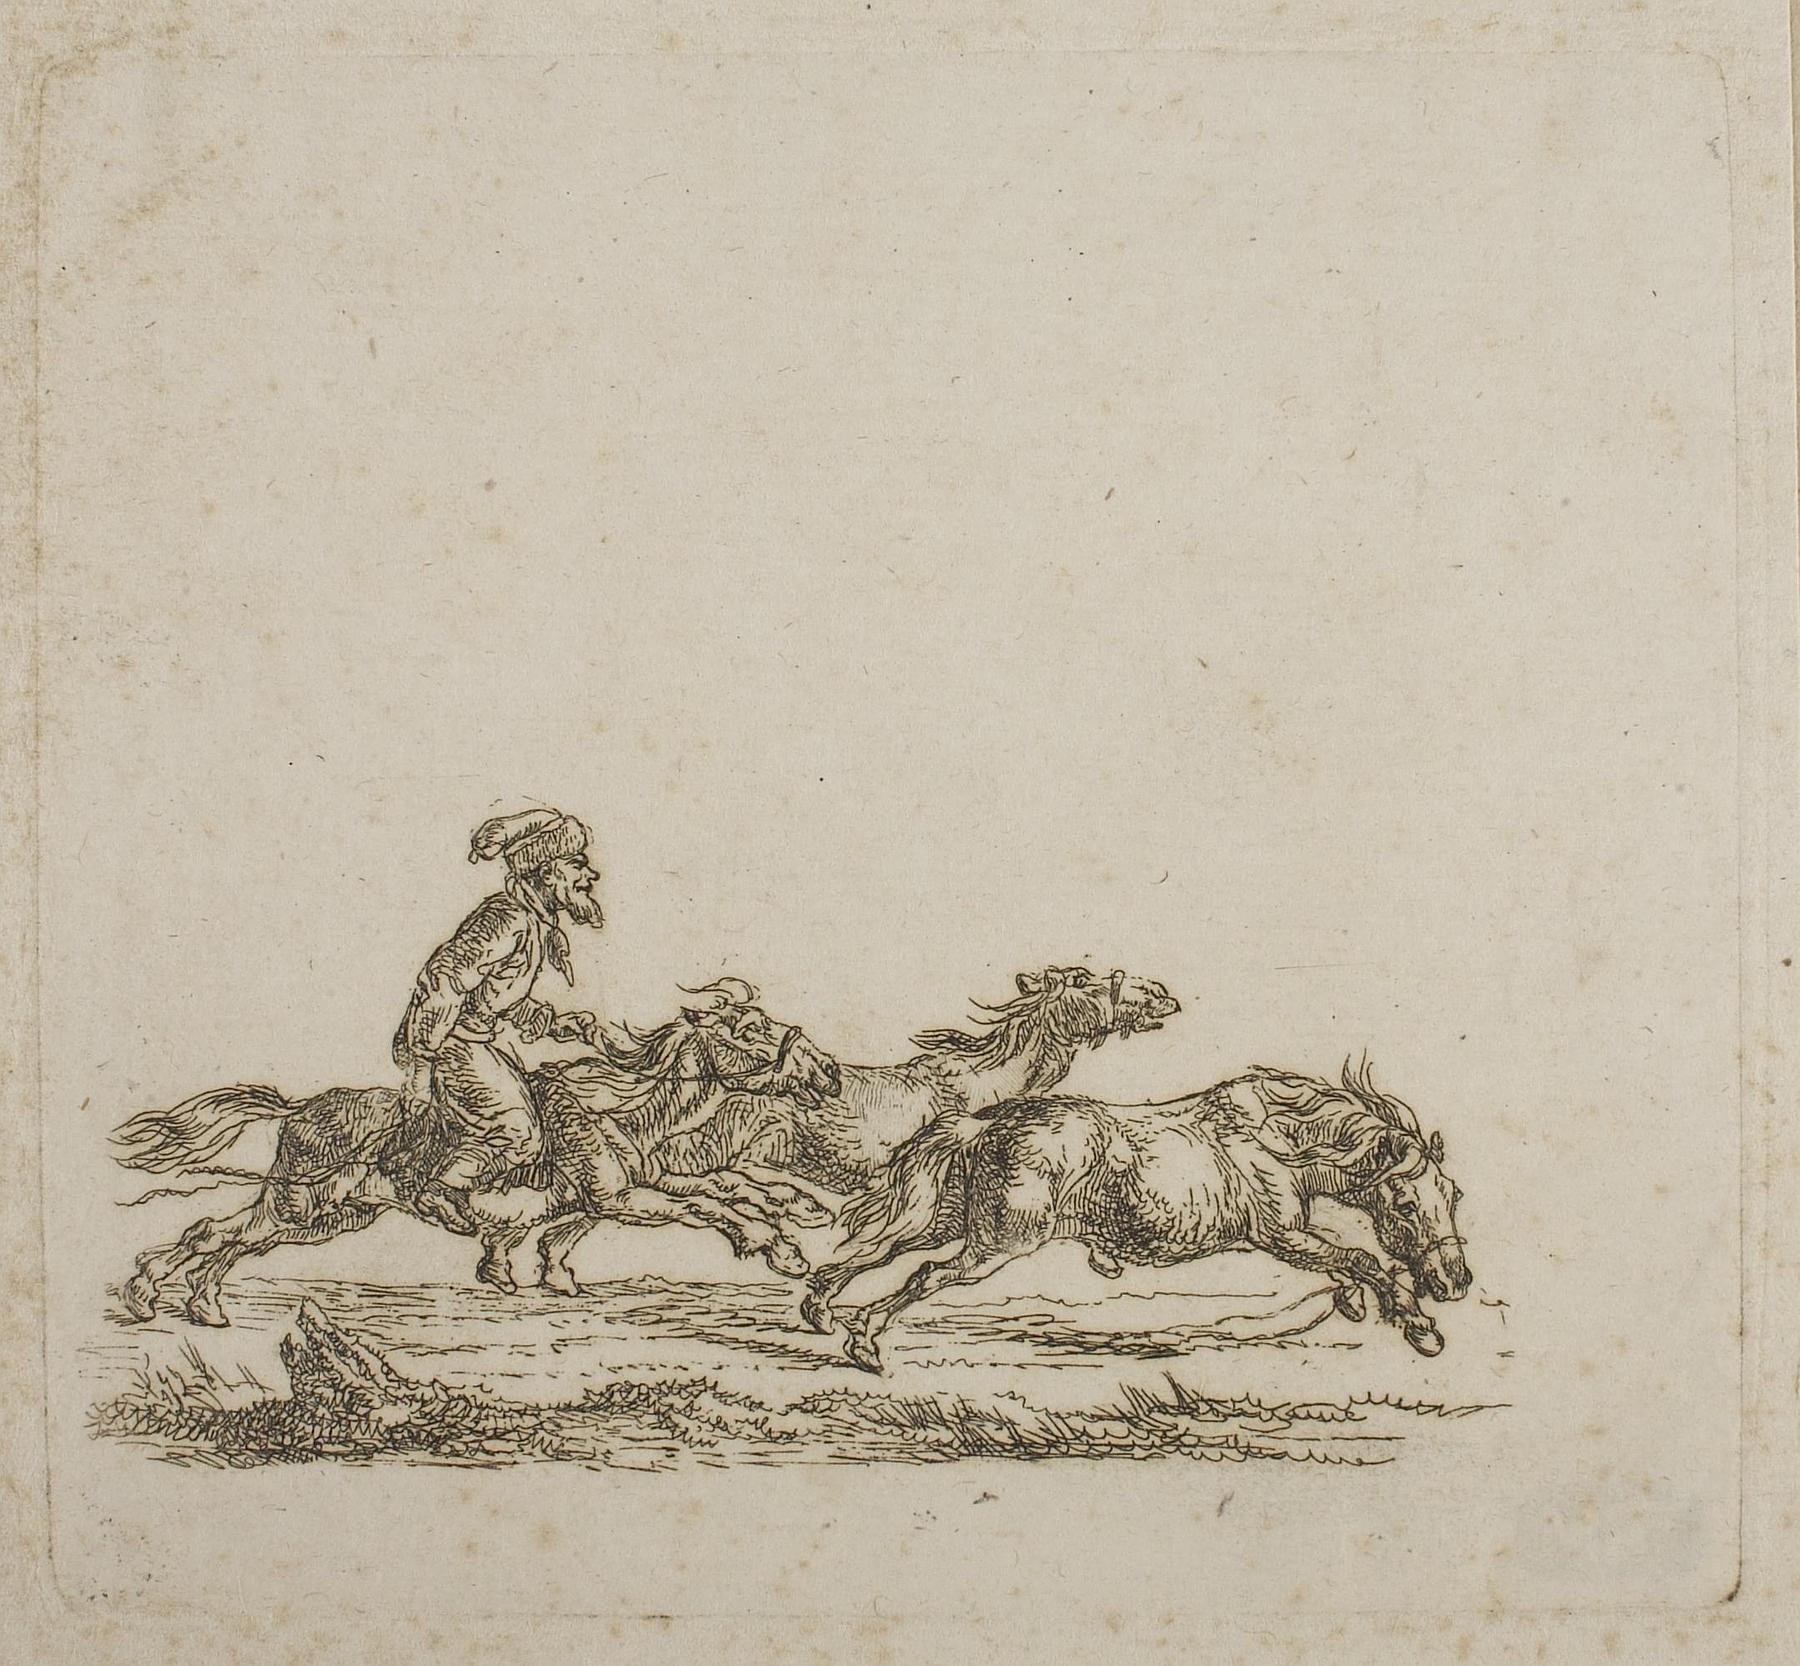 Cossack Galopps after two Horses, E569